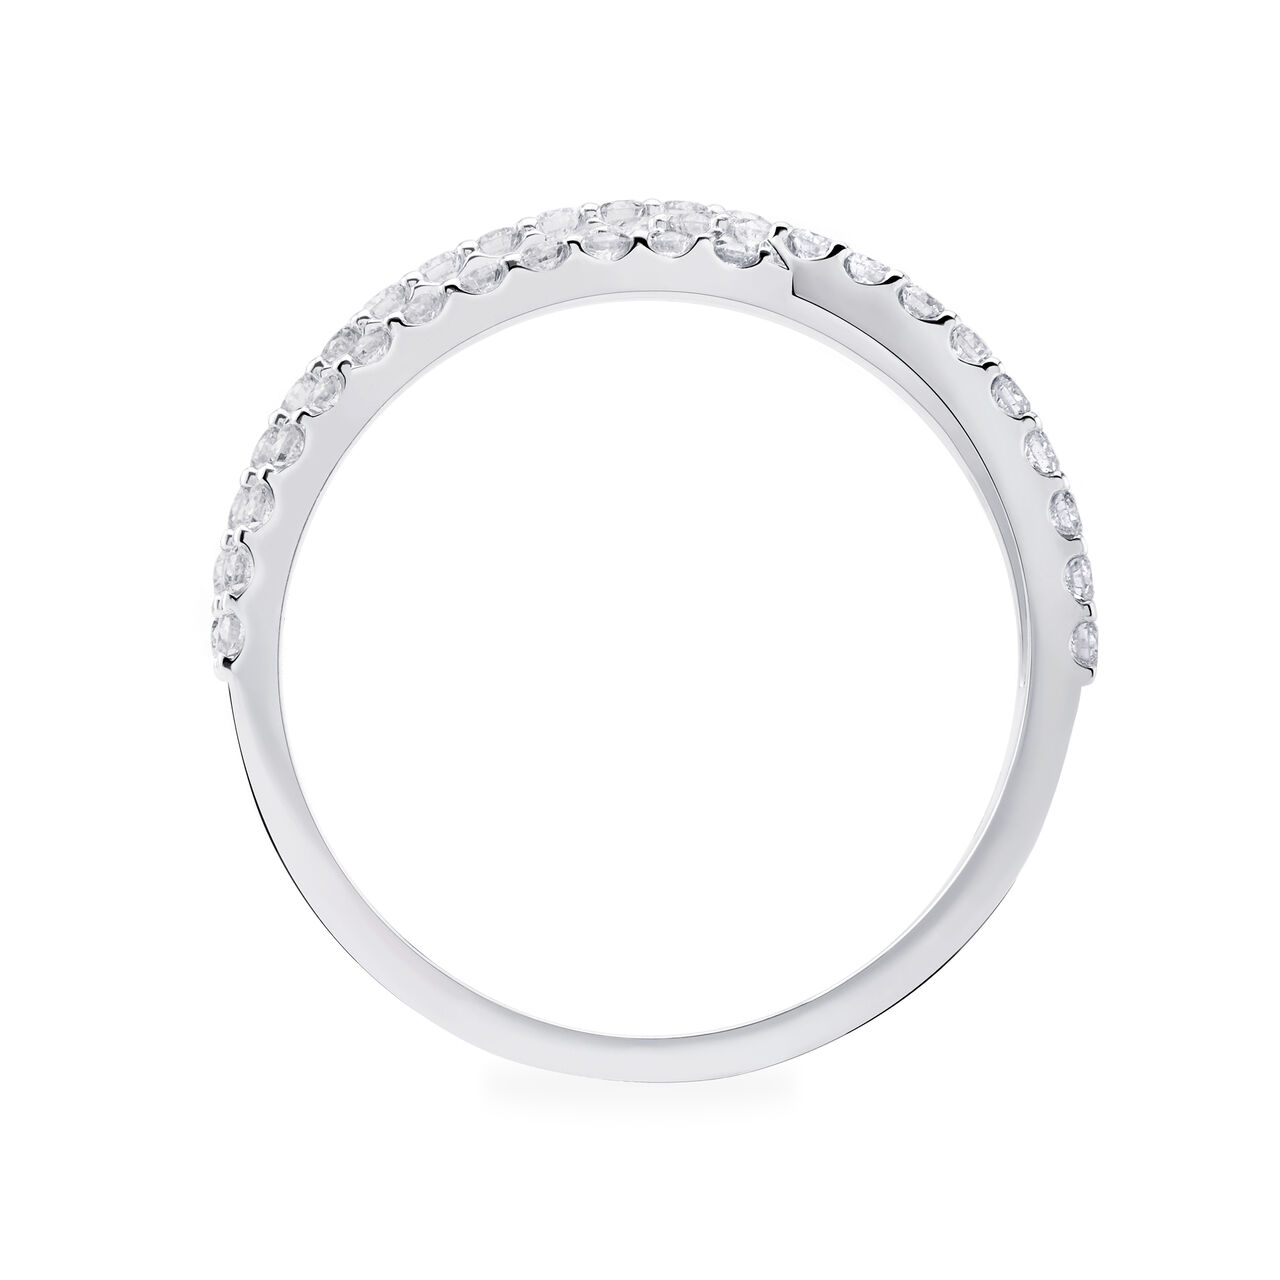 Birks Rosée du Matin  Diamond and White Gold Ring, Small 450016187187